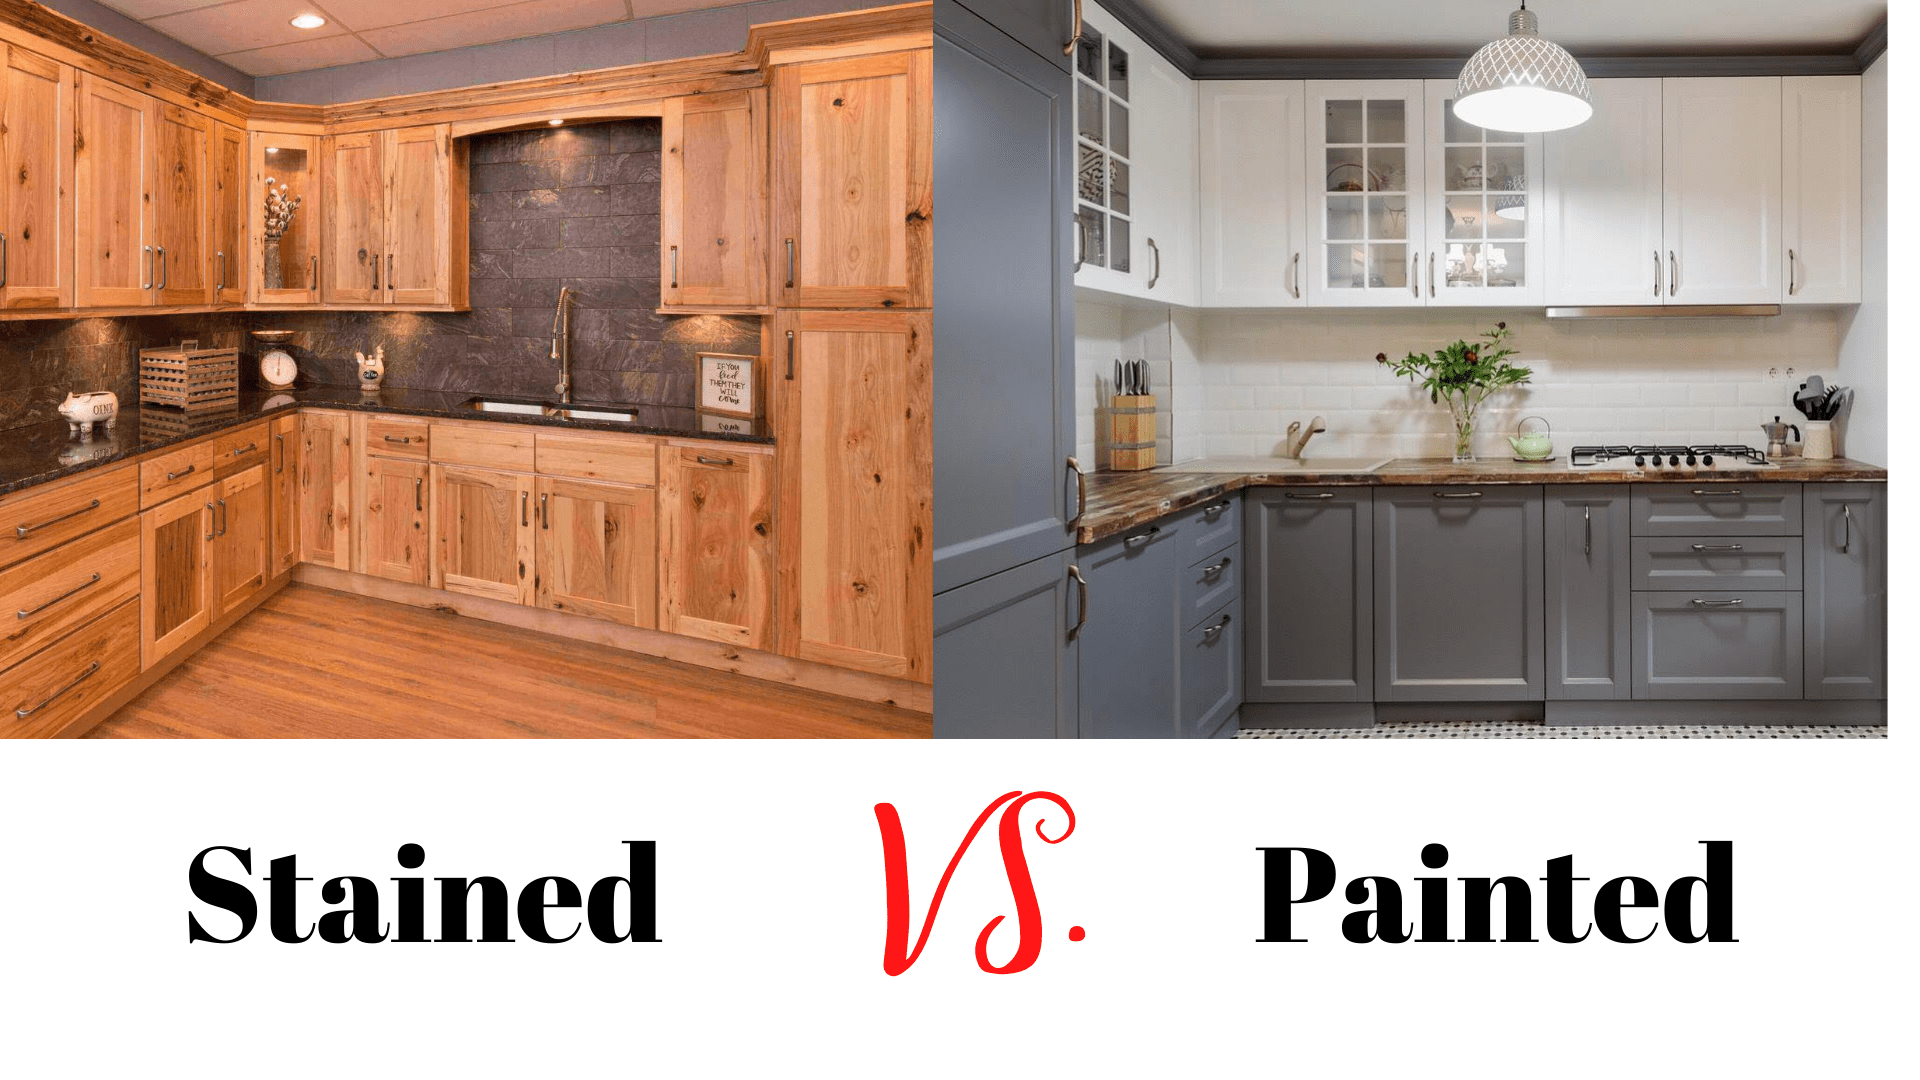 Painted vs. Stained Kitchen Cabinets - Pros & Cons - 55 ...